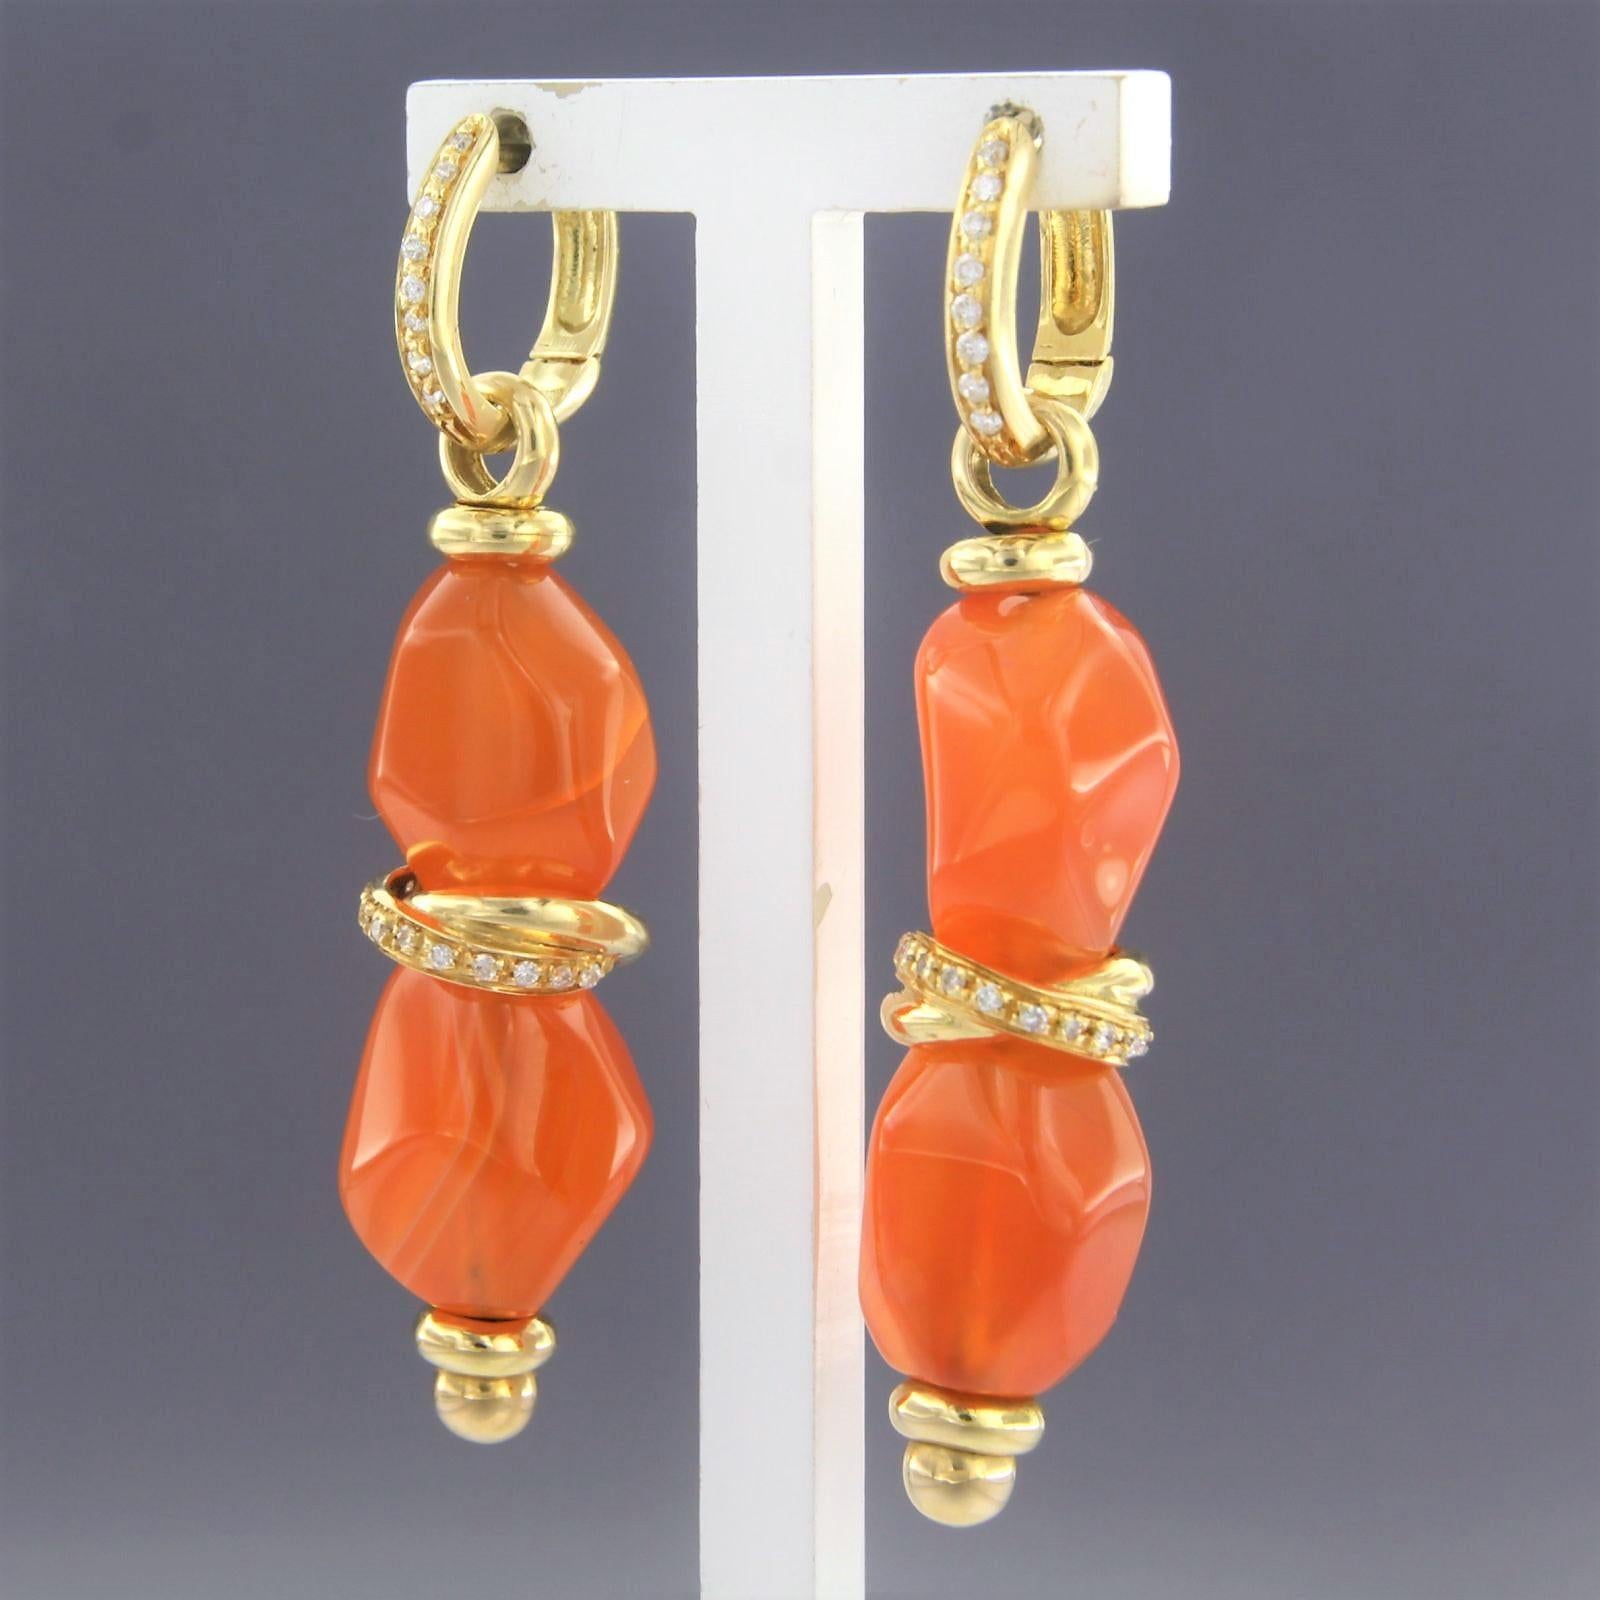 Brilliant Cut Earrings with carnelian and diamonds 18k yellow gold For Sale